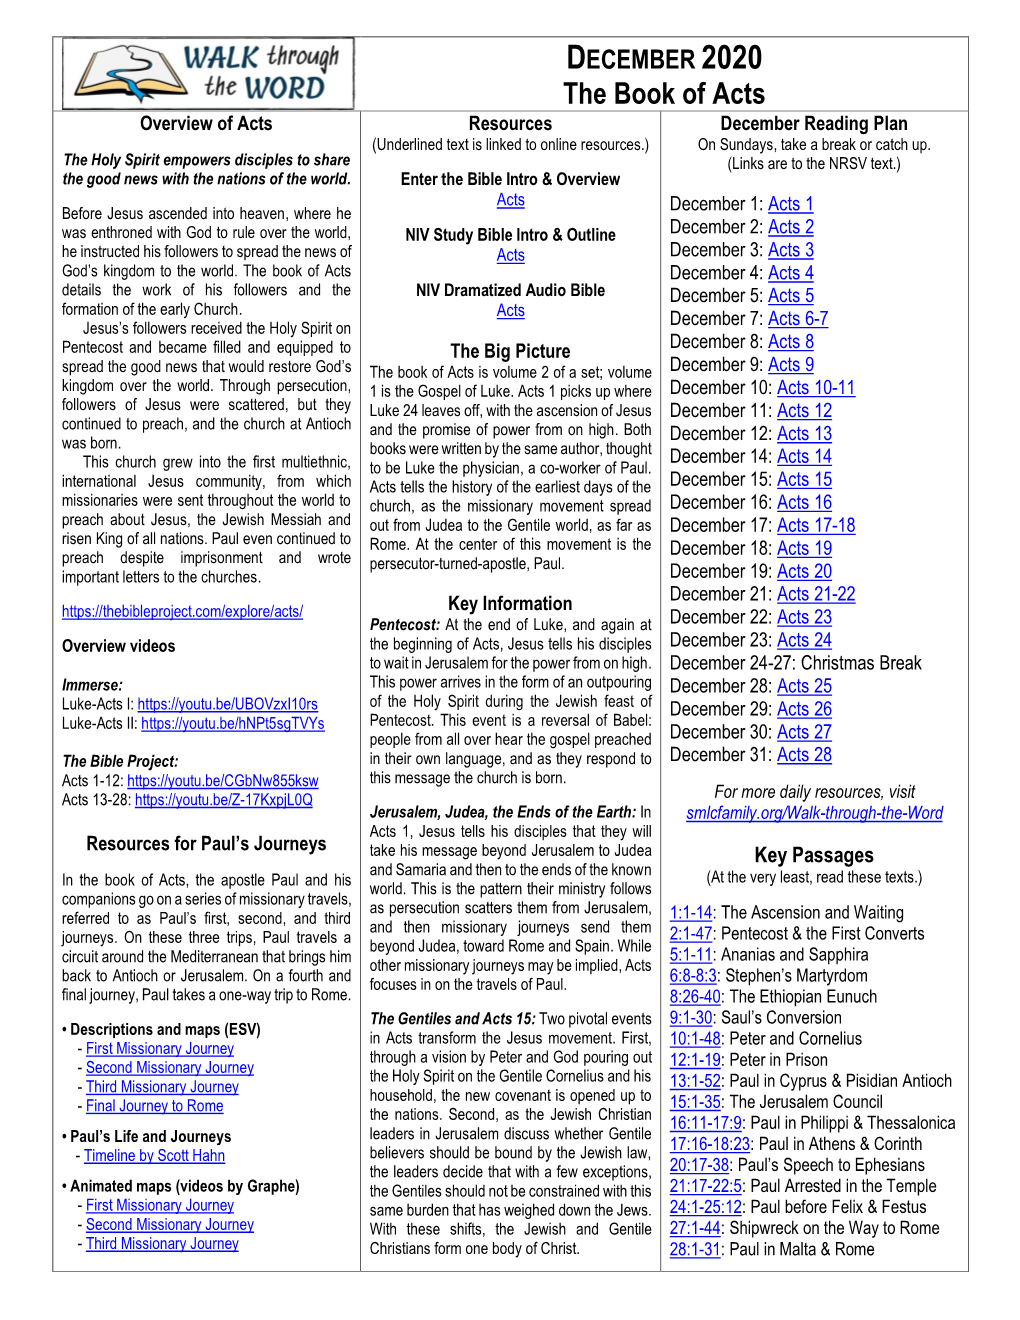 The Book of Acts Overview of Acts Resources December Reading Plan (Underlined Text Is Linked to Online Resources.) on Sundays, Take a Break Or Catch Up